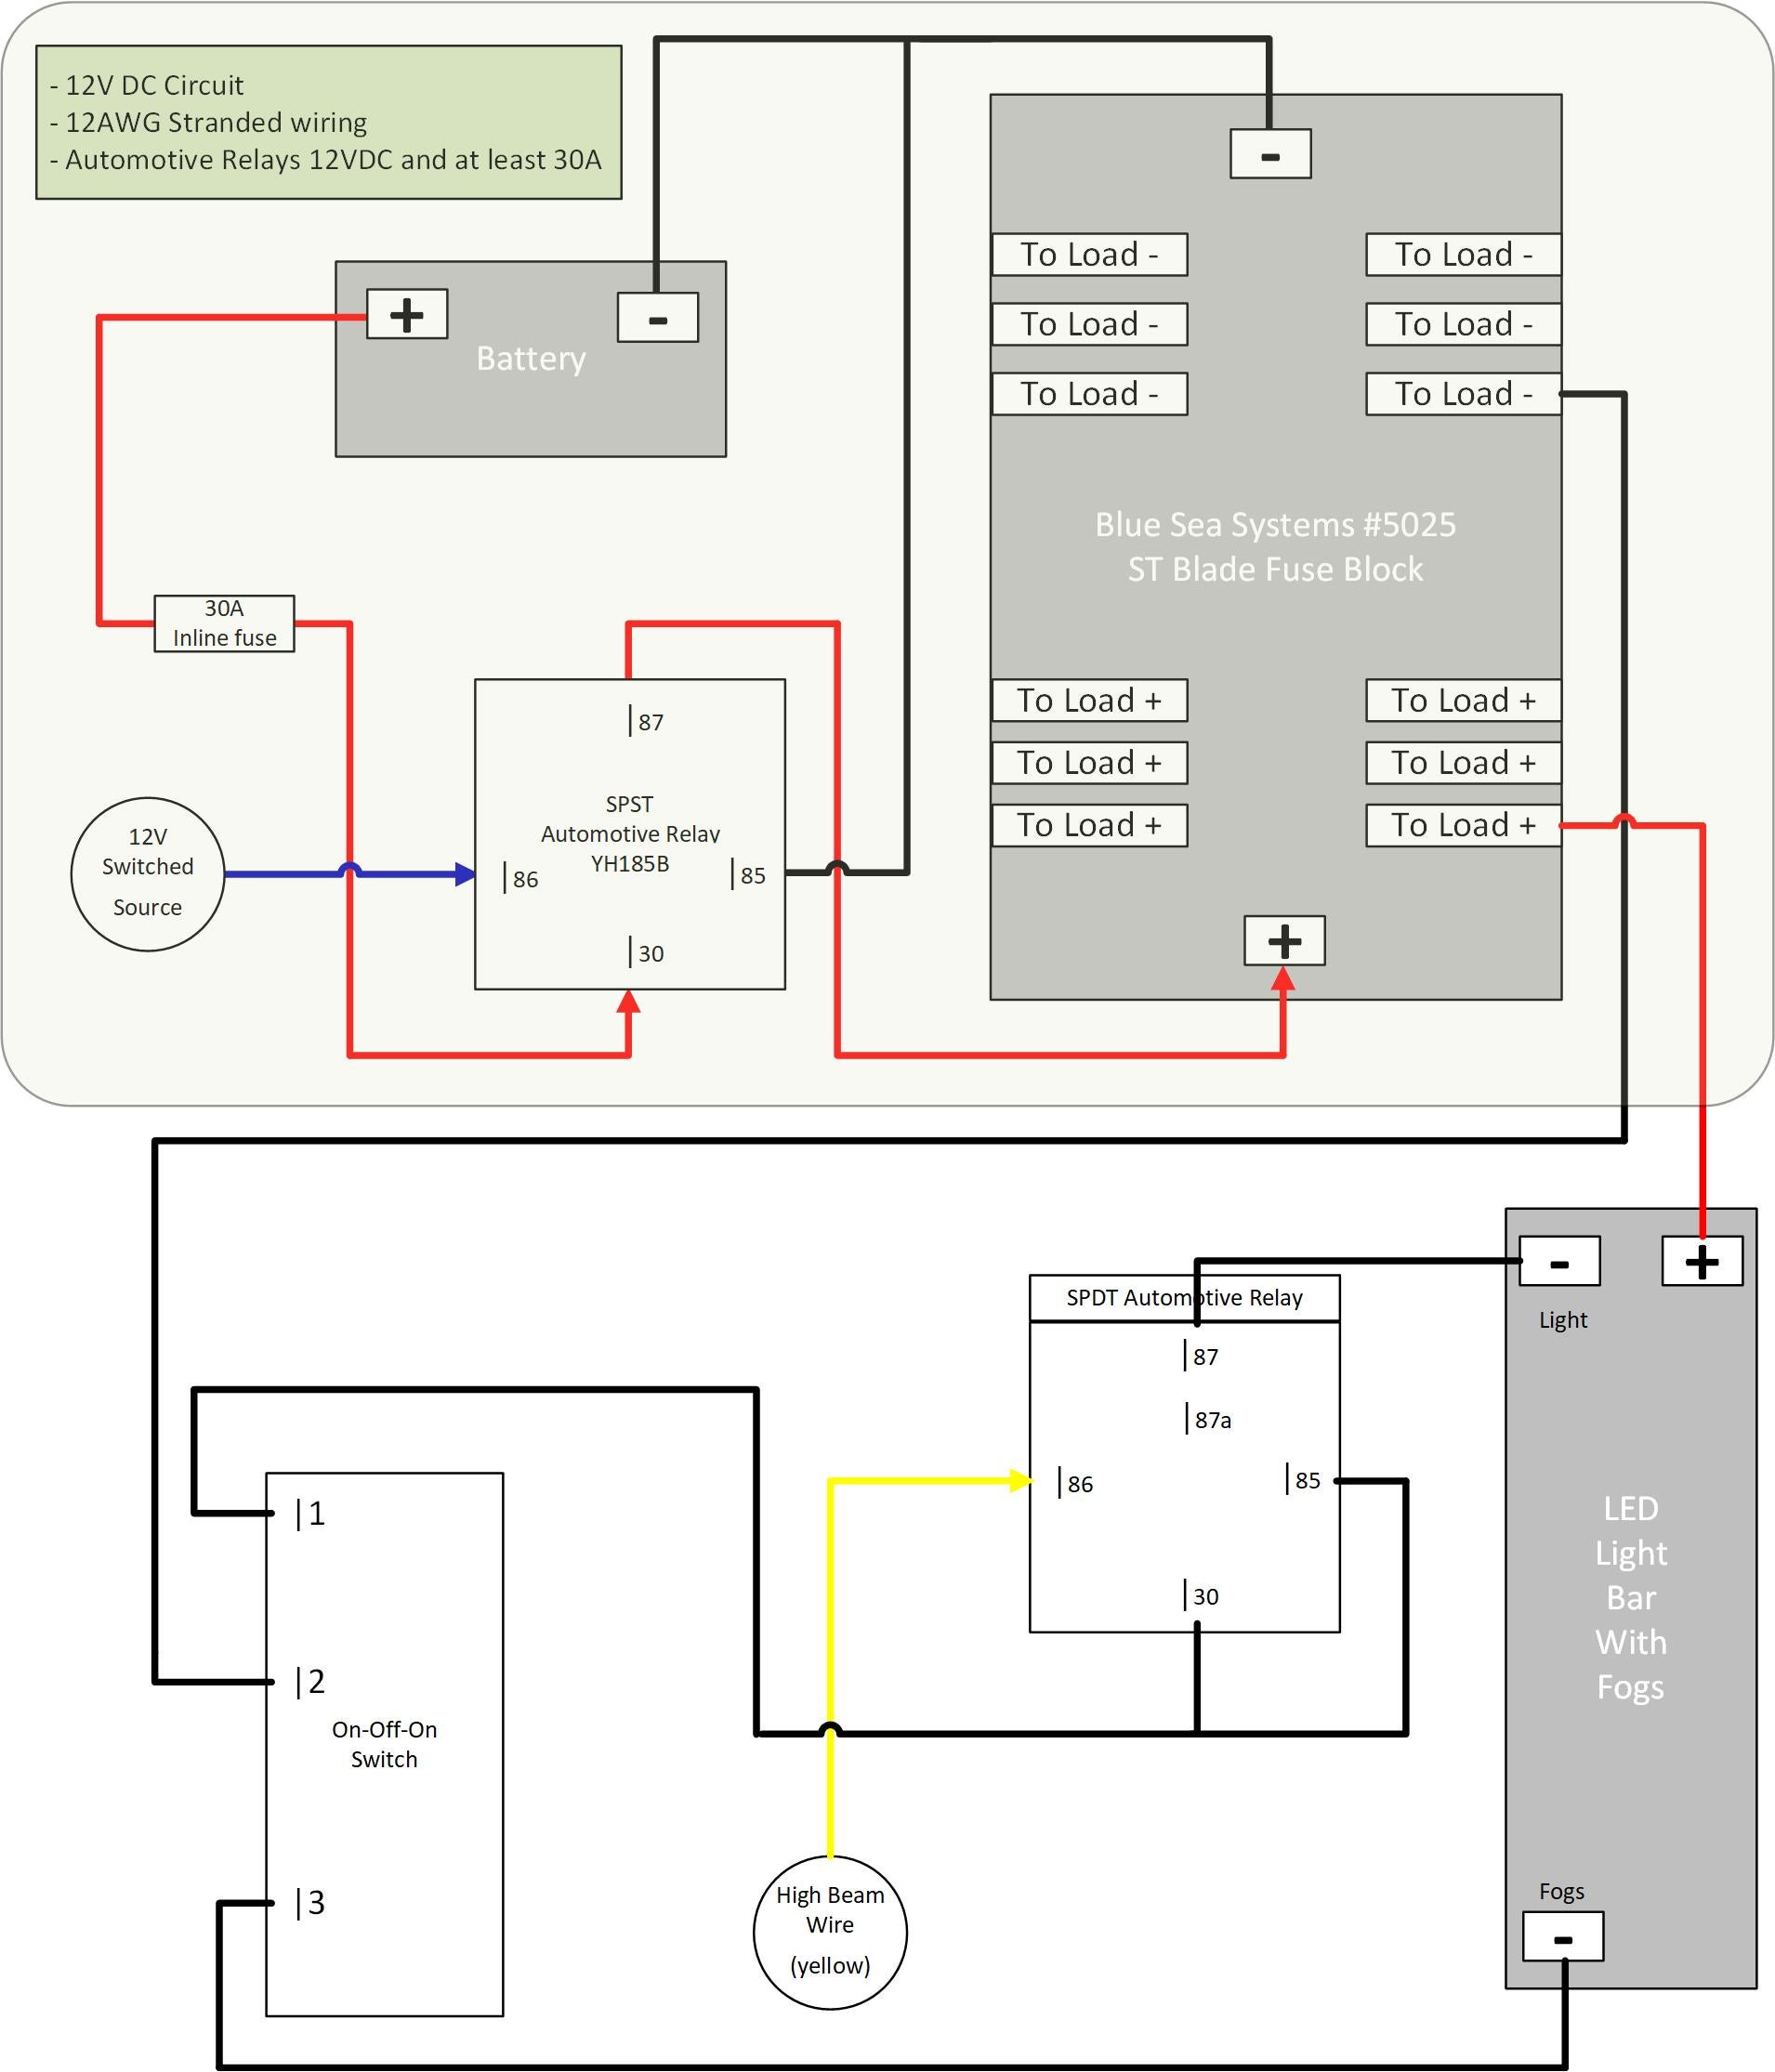 Wiring Diagram Led Light Bar - Wiring Digital and Schematic